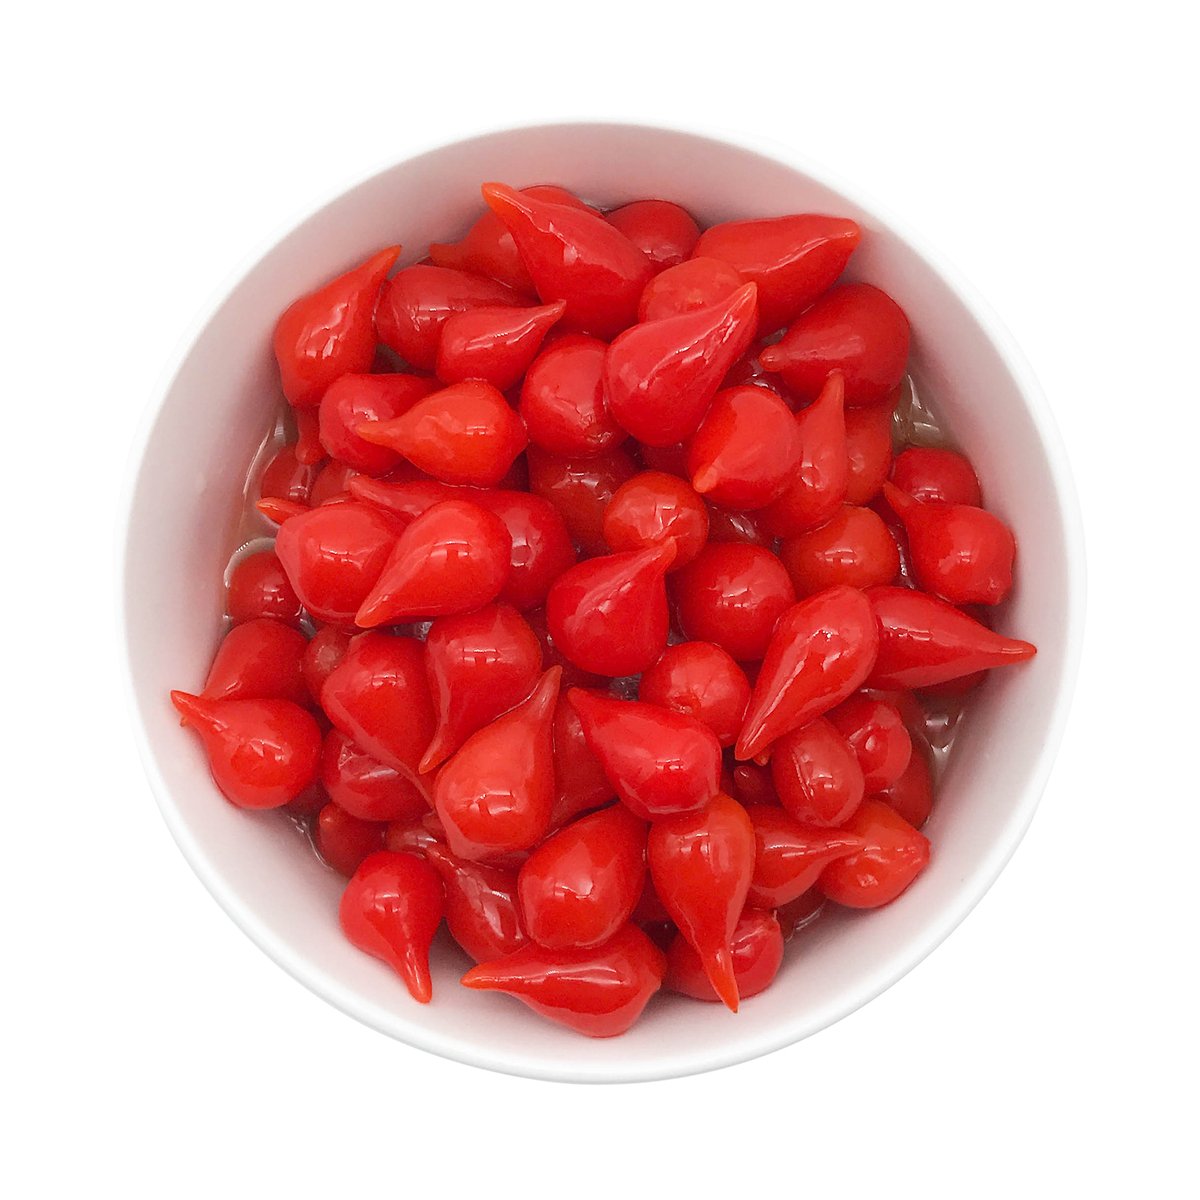 Touche Red Sweet Drop Peppers 300 g